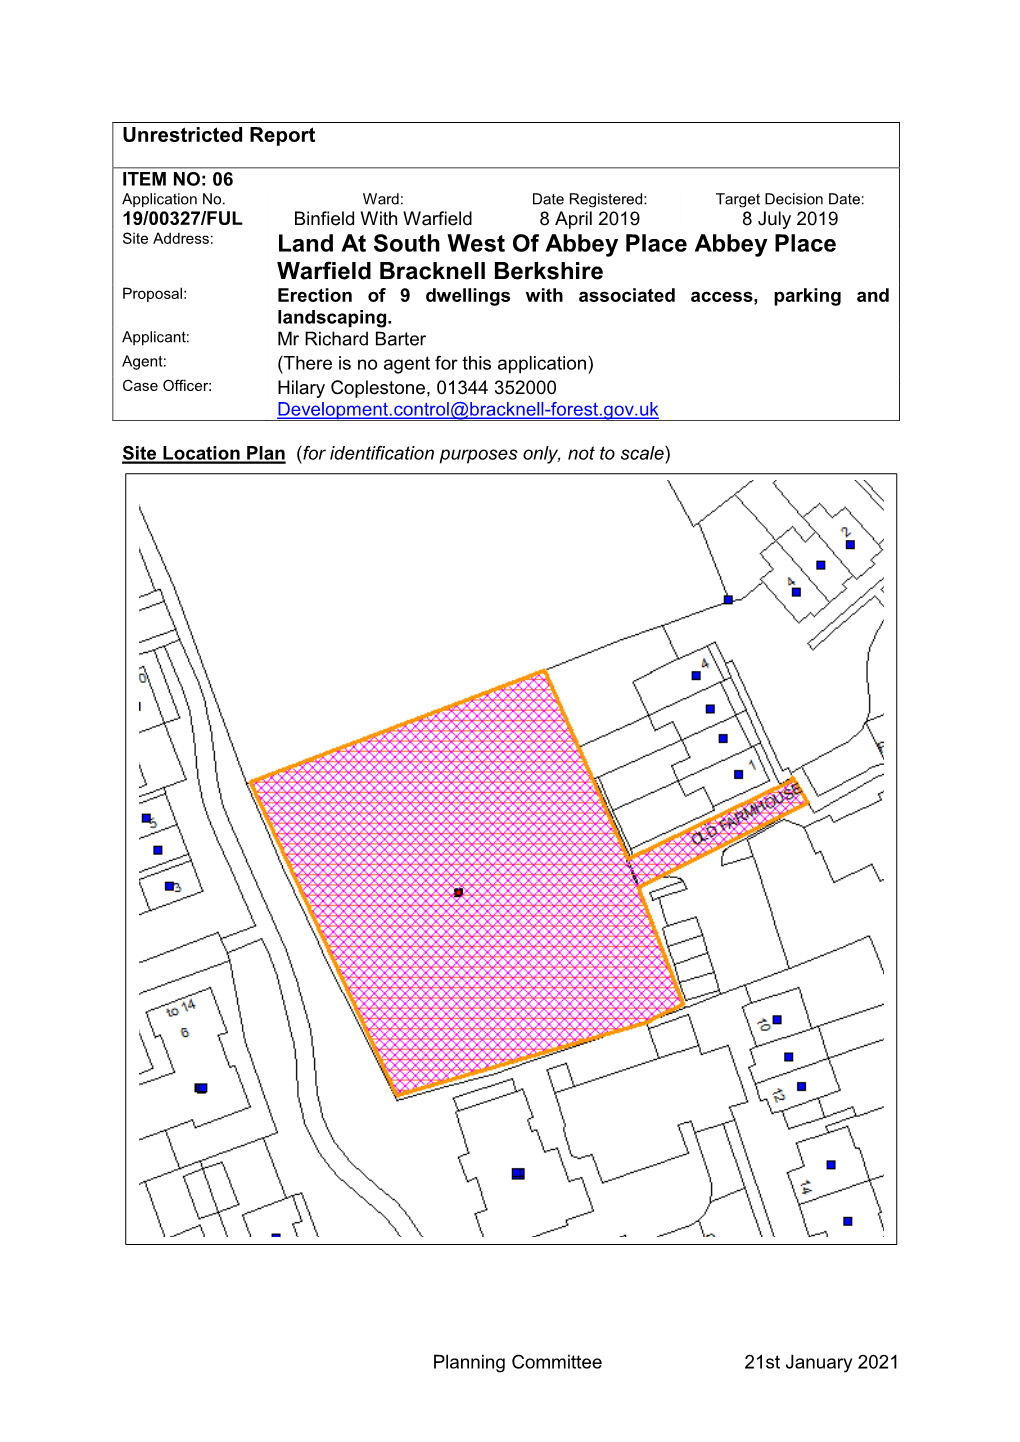 19/00327/FUL Land at South West of Abbey Place, Abbey Place, Warfield